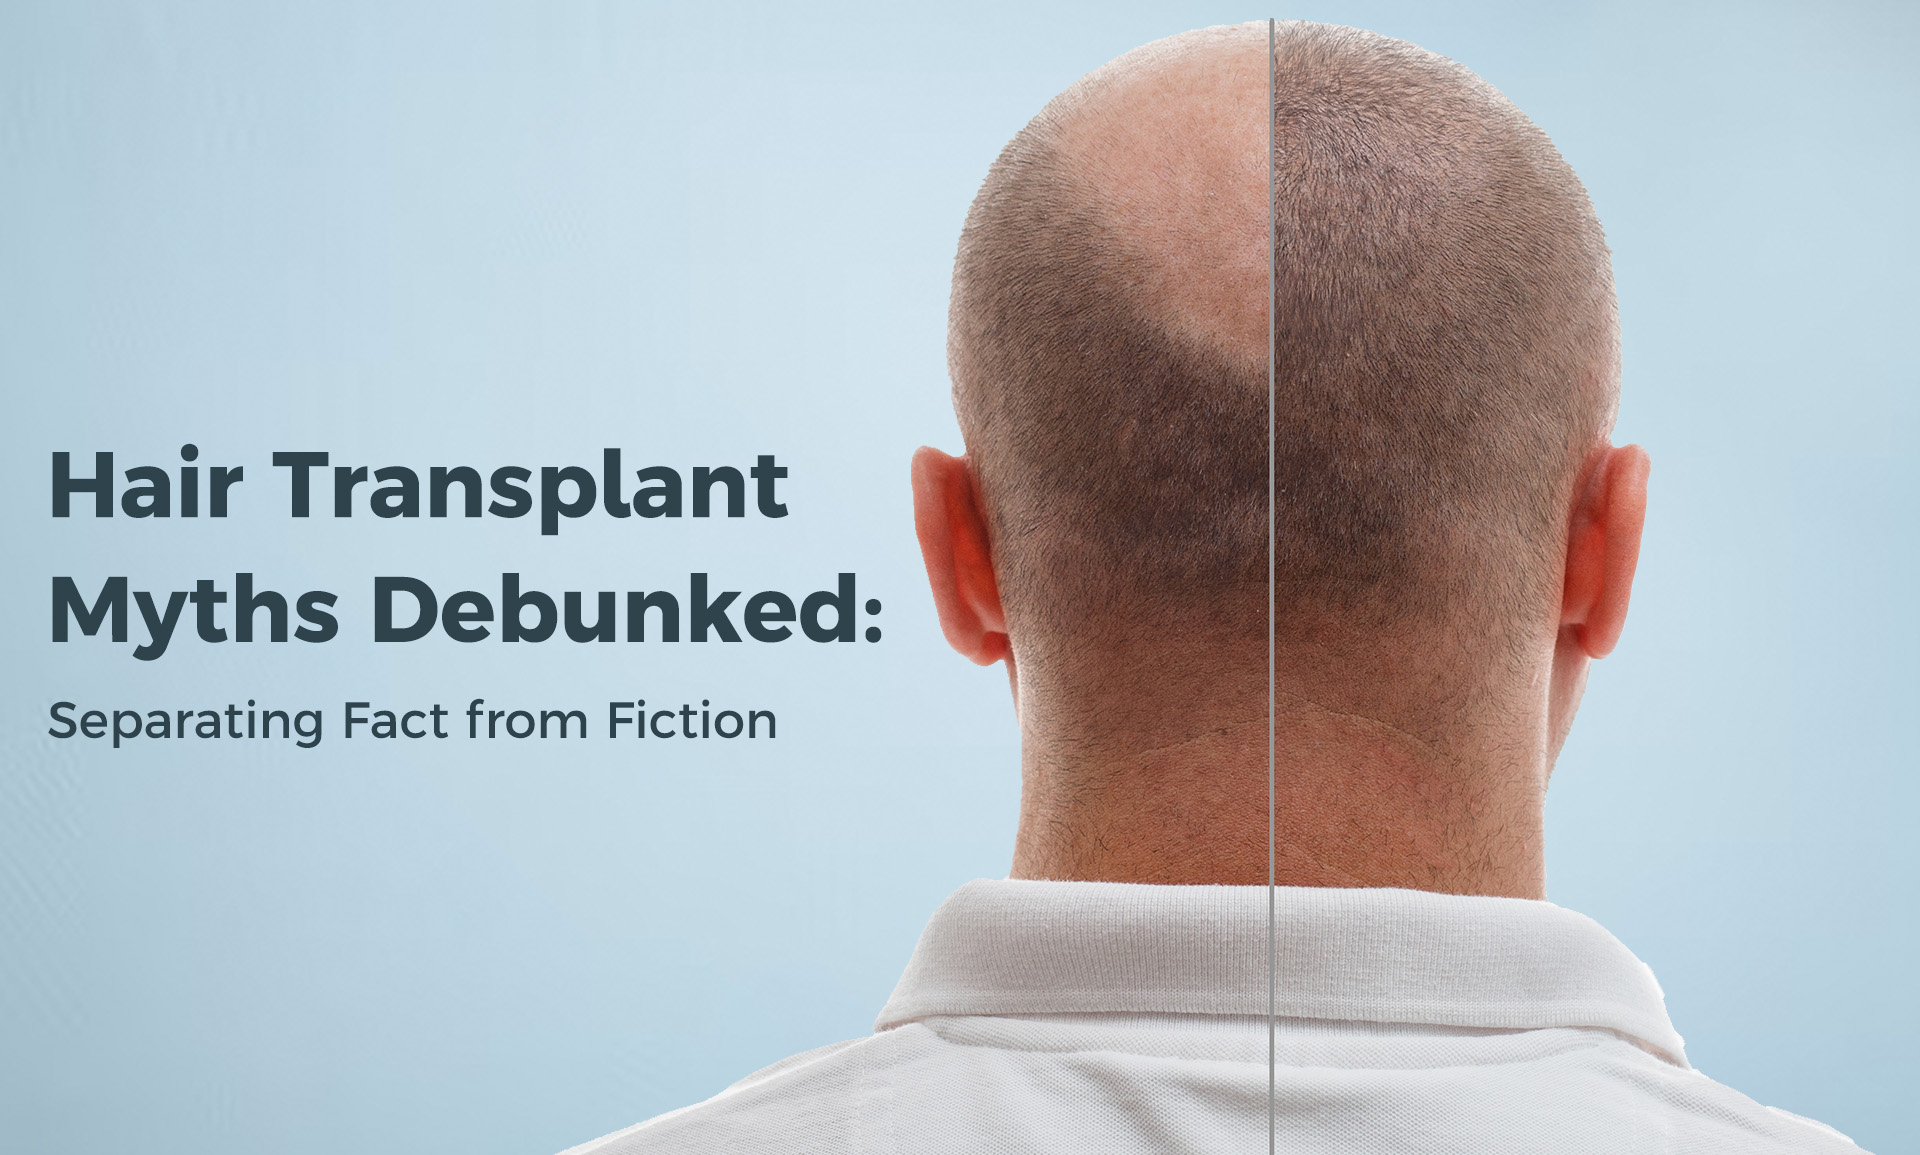 Hair Transplant Myths Debunked: Separating Fact from Fiction